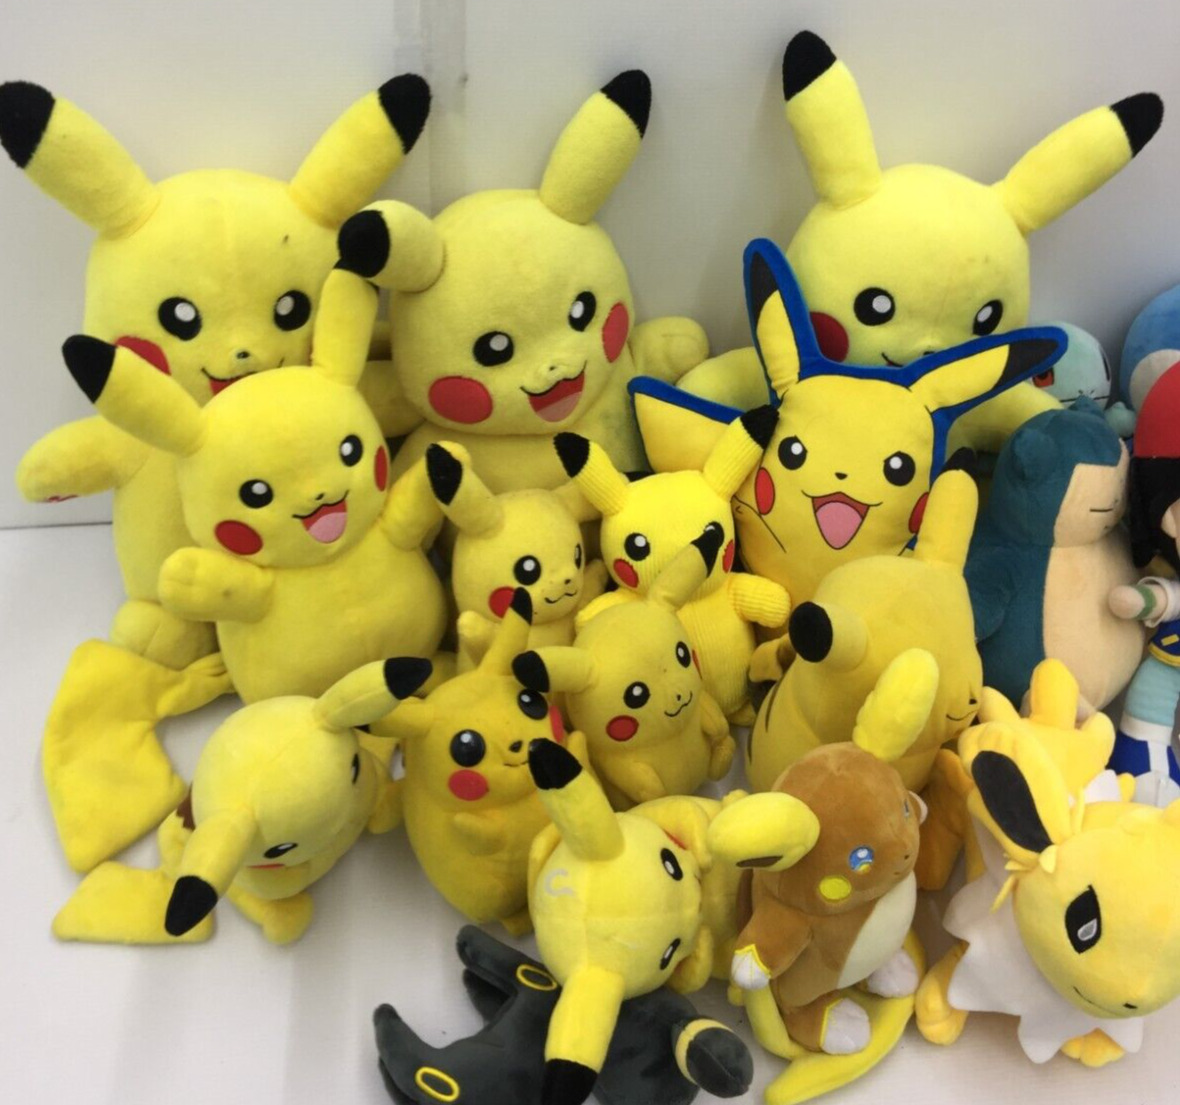 LOT of 32 Pokemon Plush Collectibles Toys Cute Pikachu Bulbasaur Squirtle Dolls